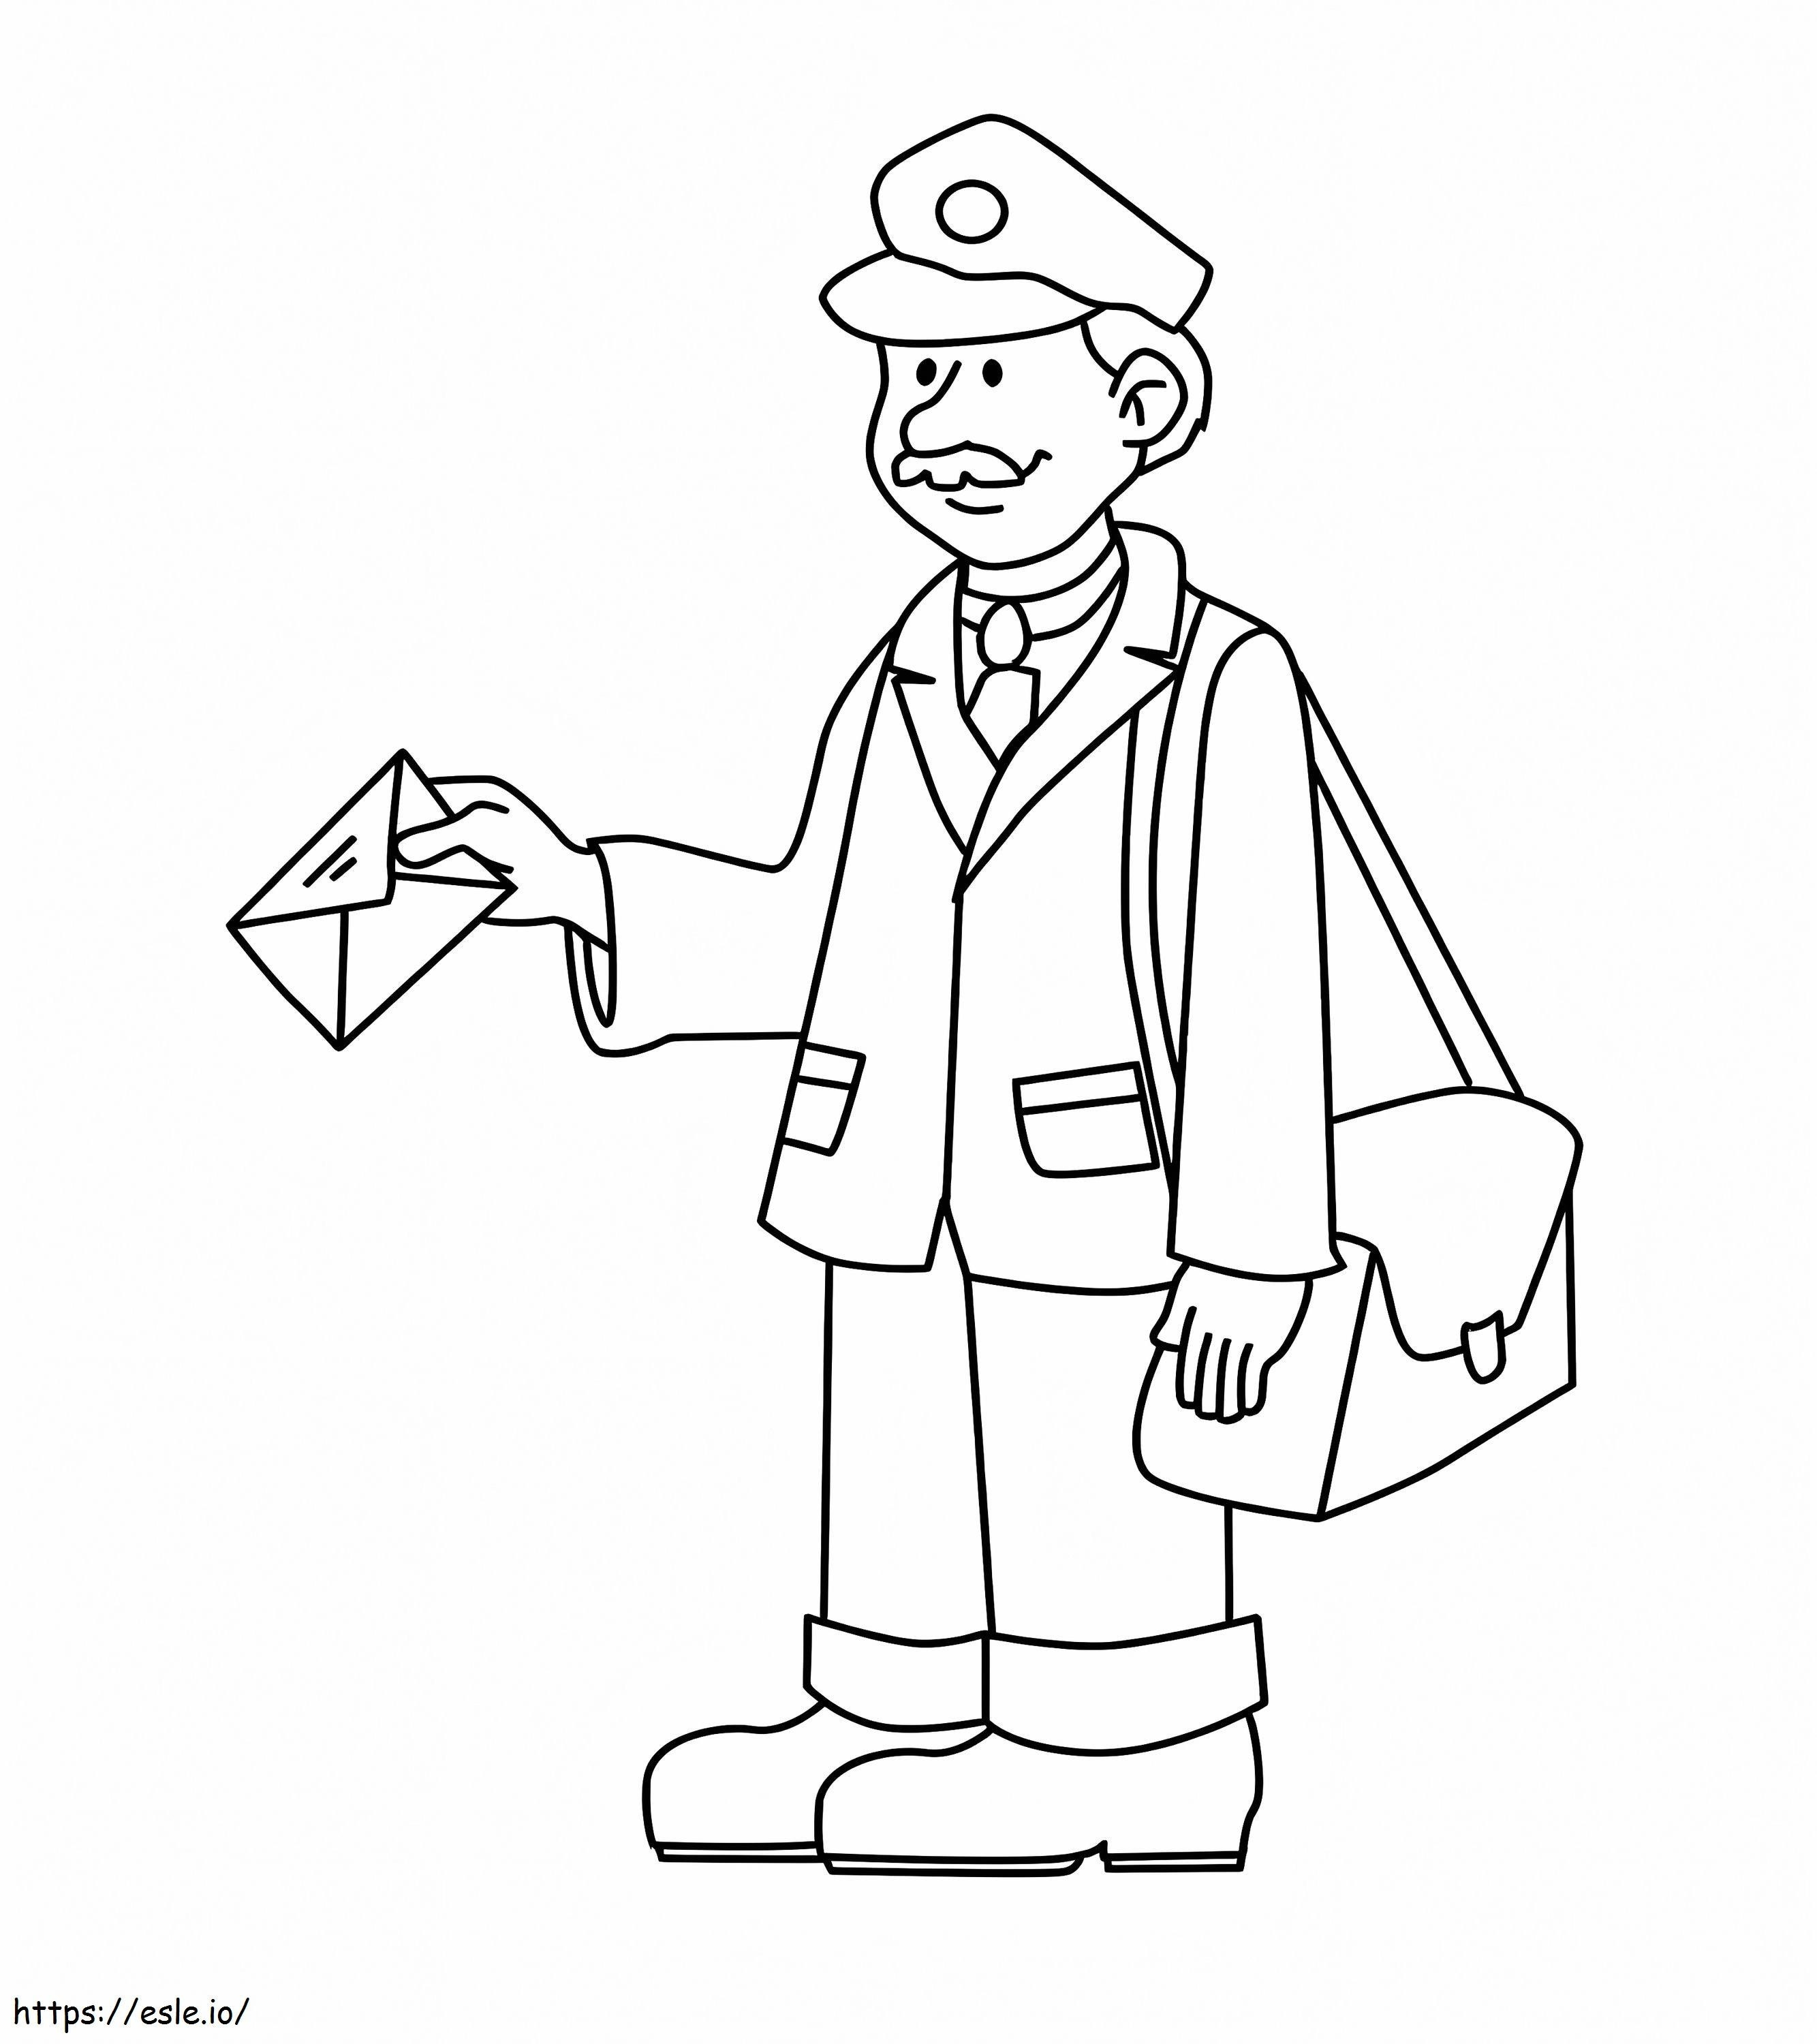 A Postman coloring page